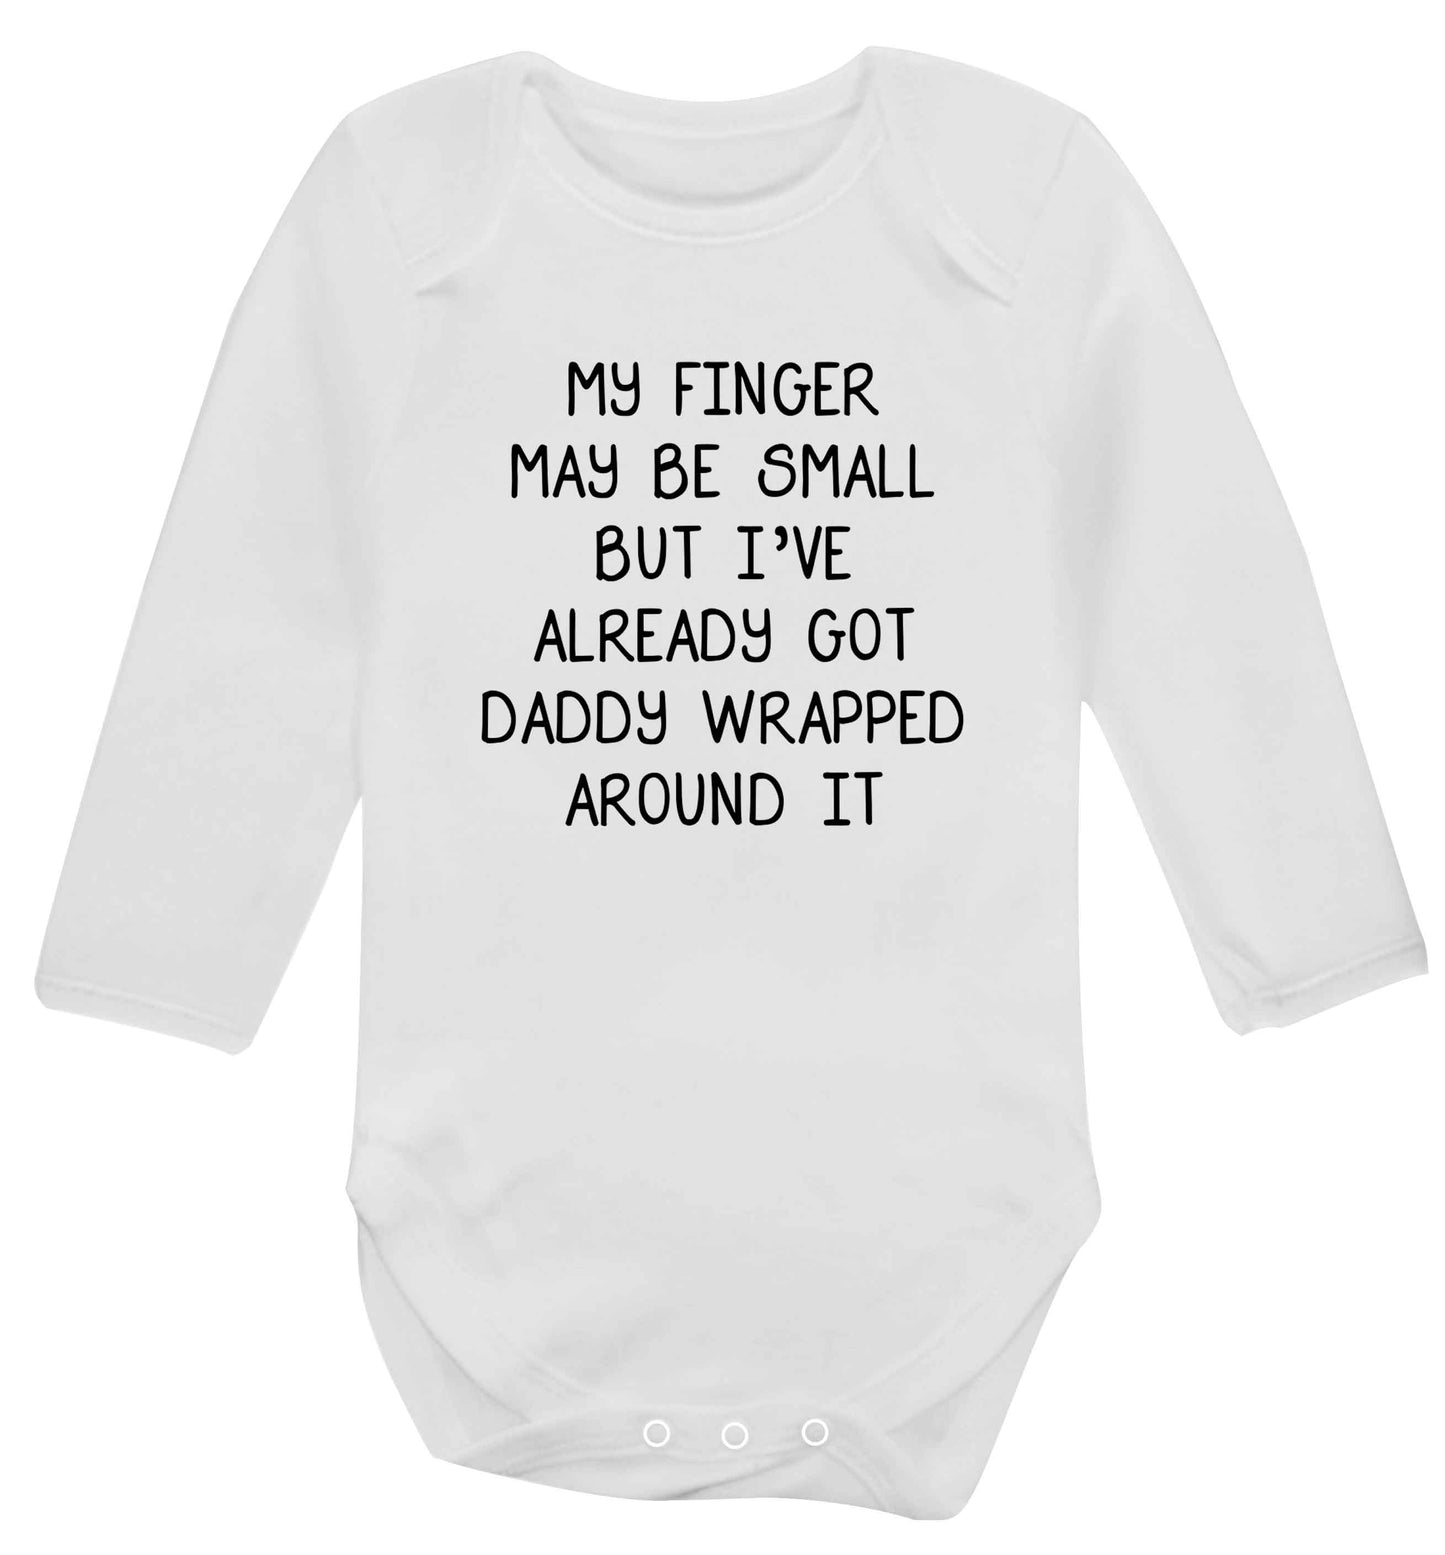 My finger may be small but I've already got daddy wrapped around it baby vest long sleeved white 6-12 months